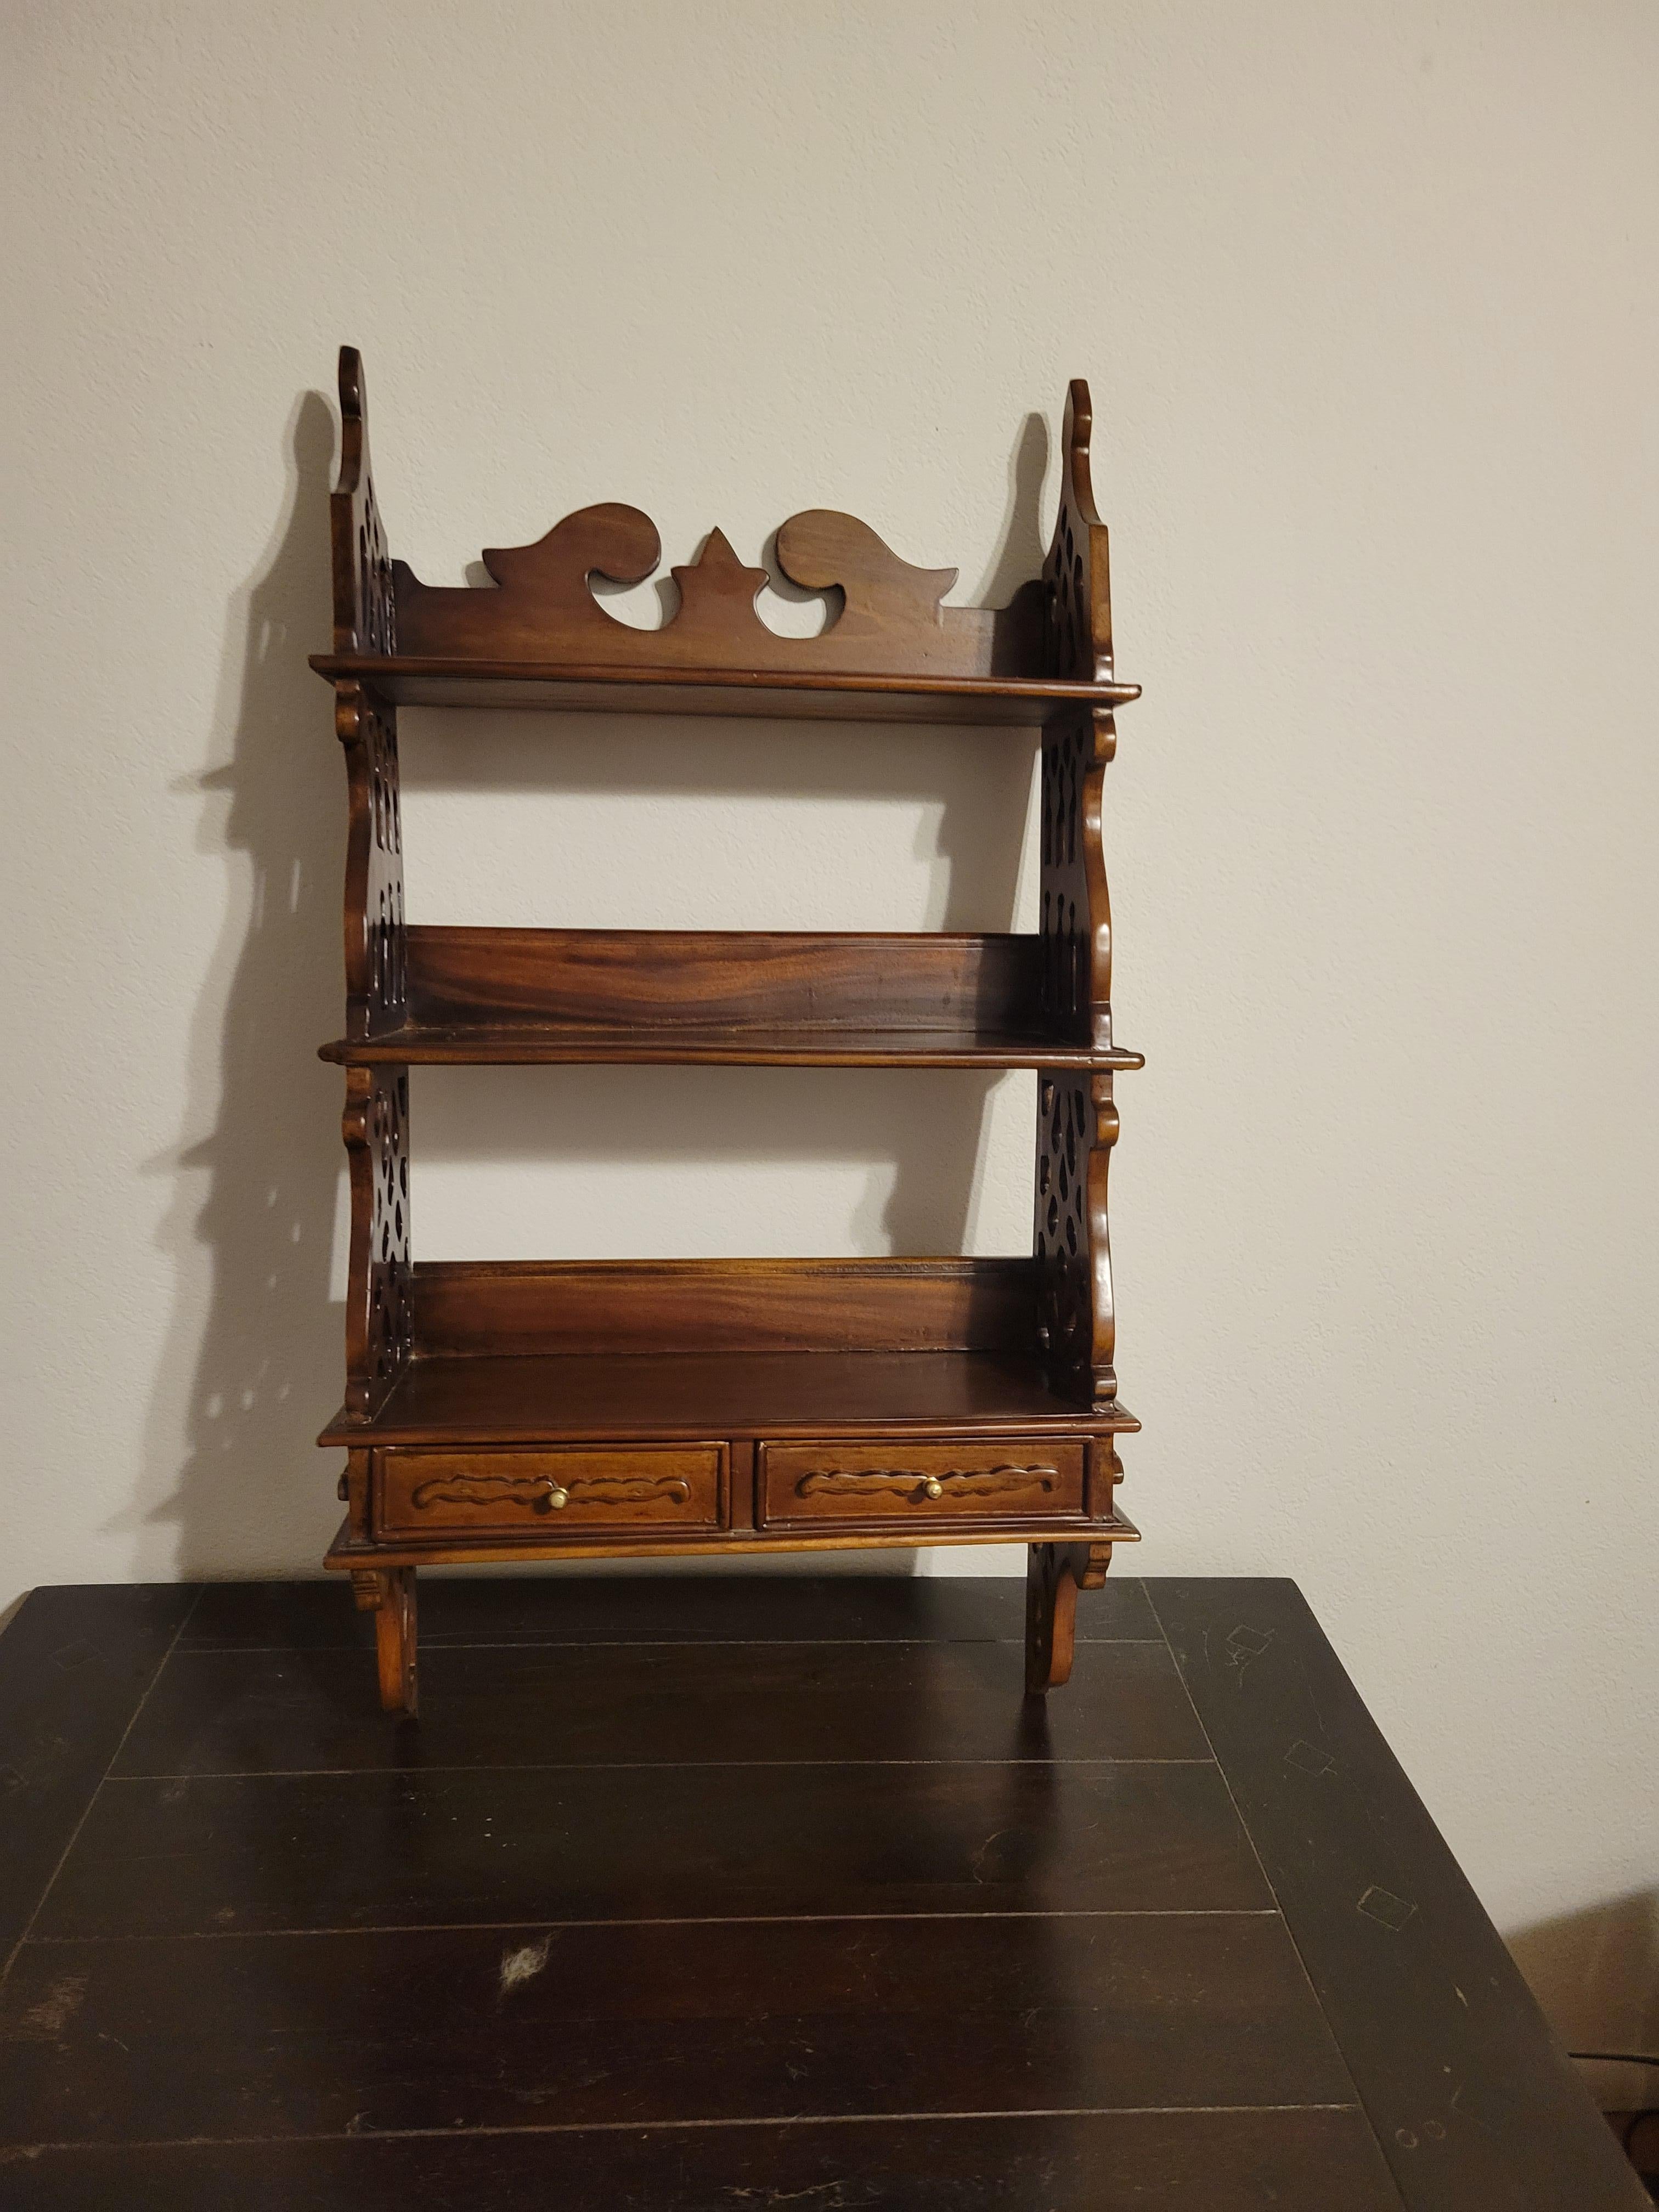 Antique French Provincial Hand-Carved Mahogany Kitchen Shelf with Two Drawers  For Sale 4